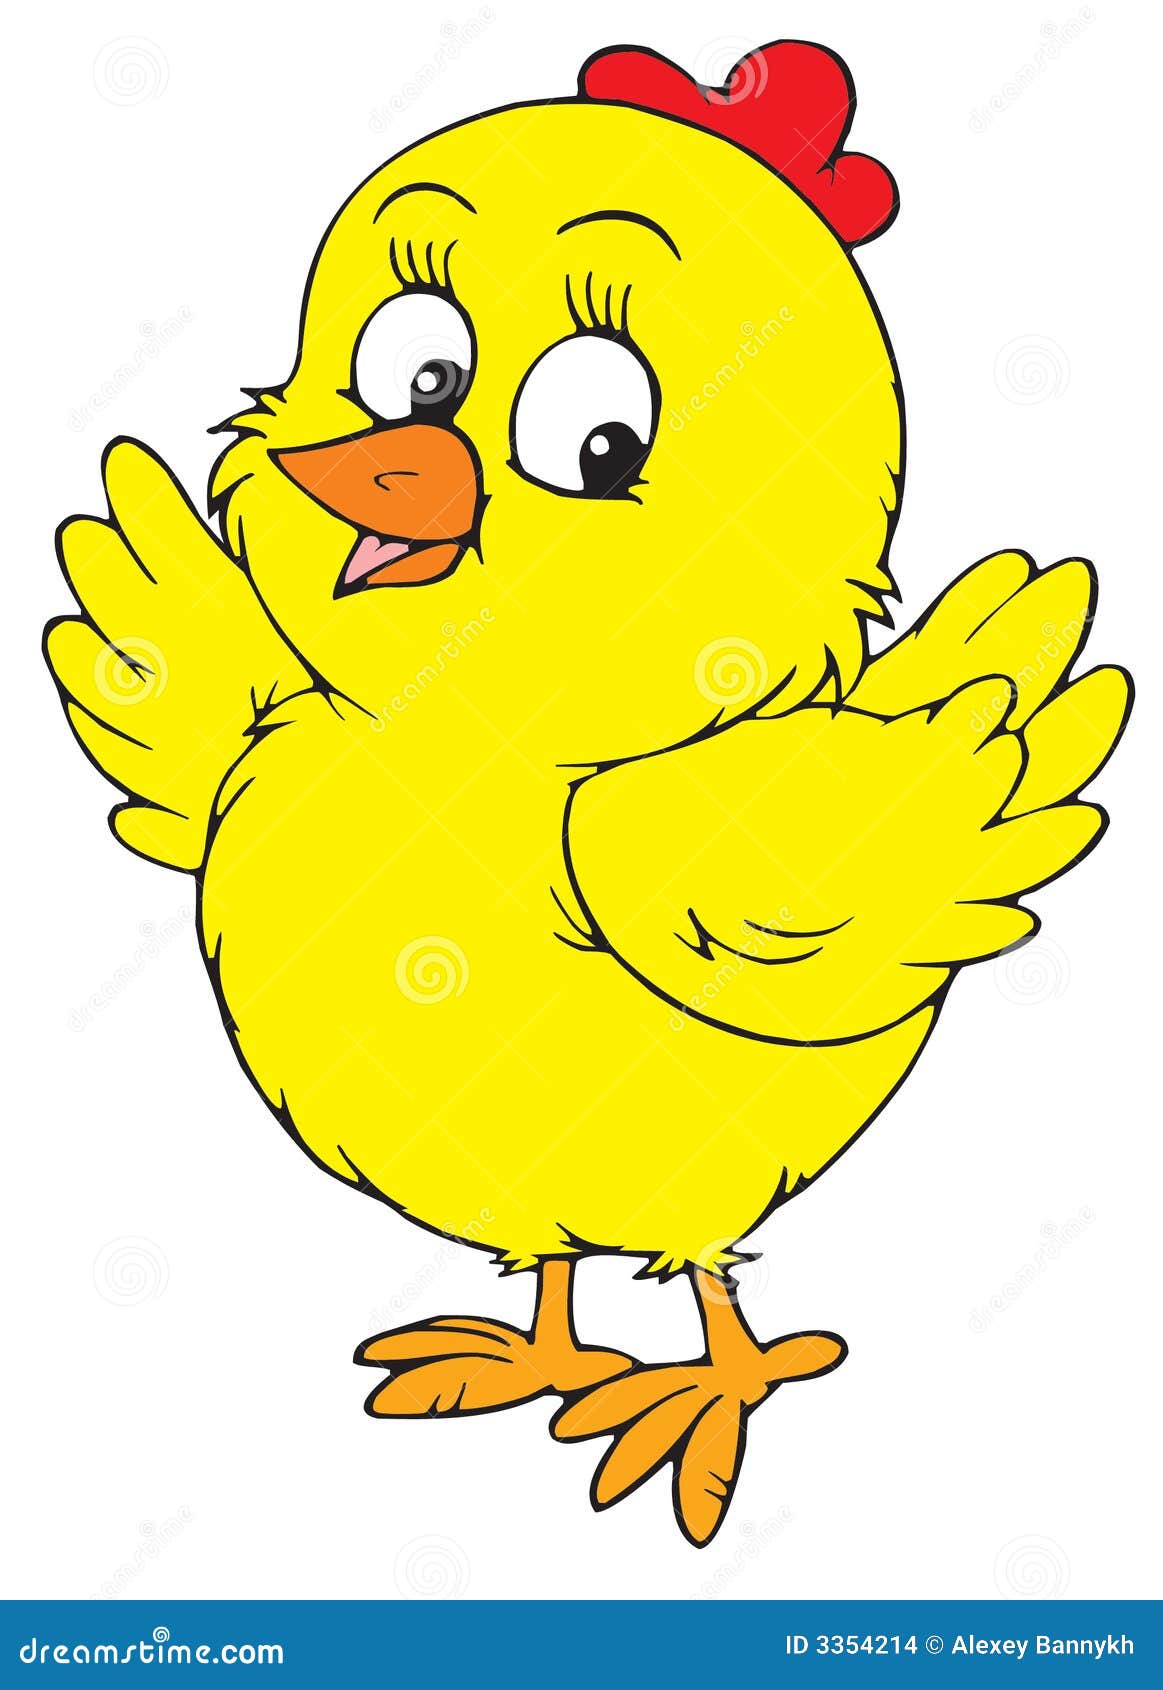 clipart of baby chickens - photo #28